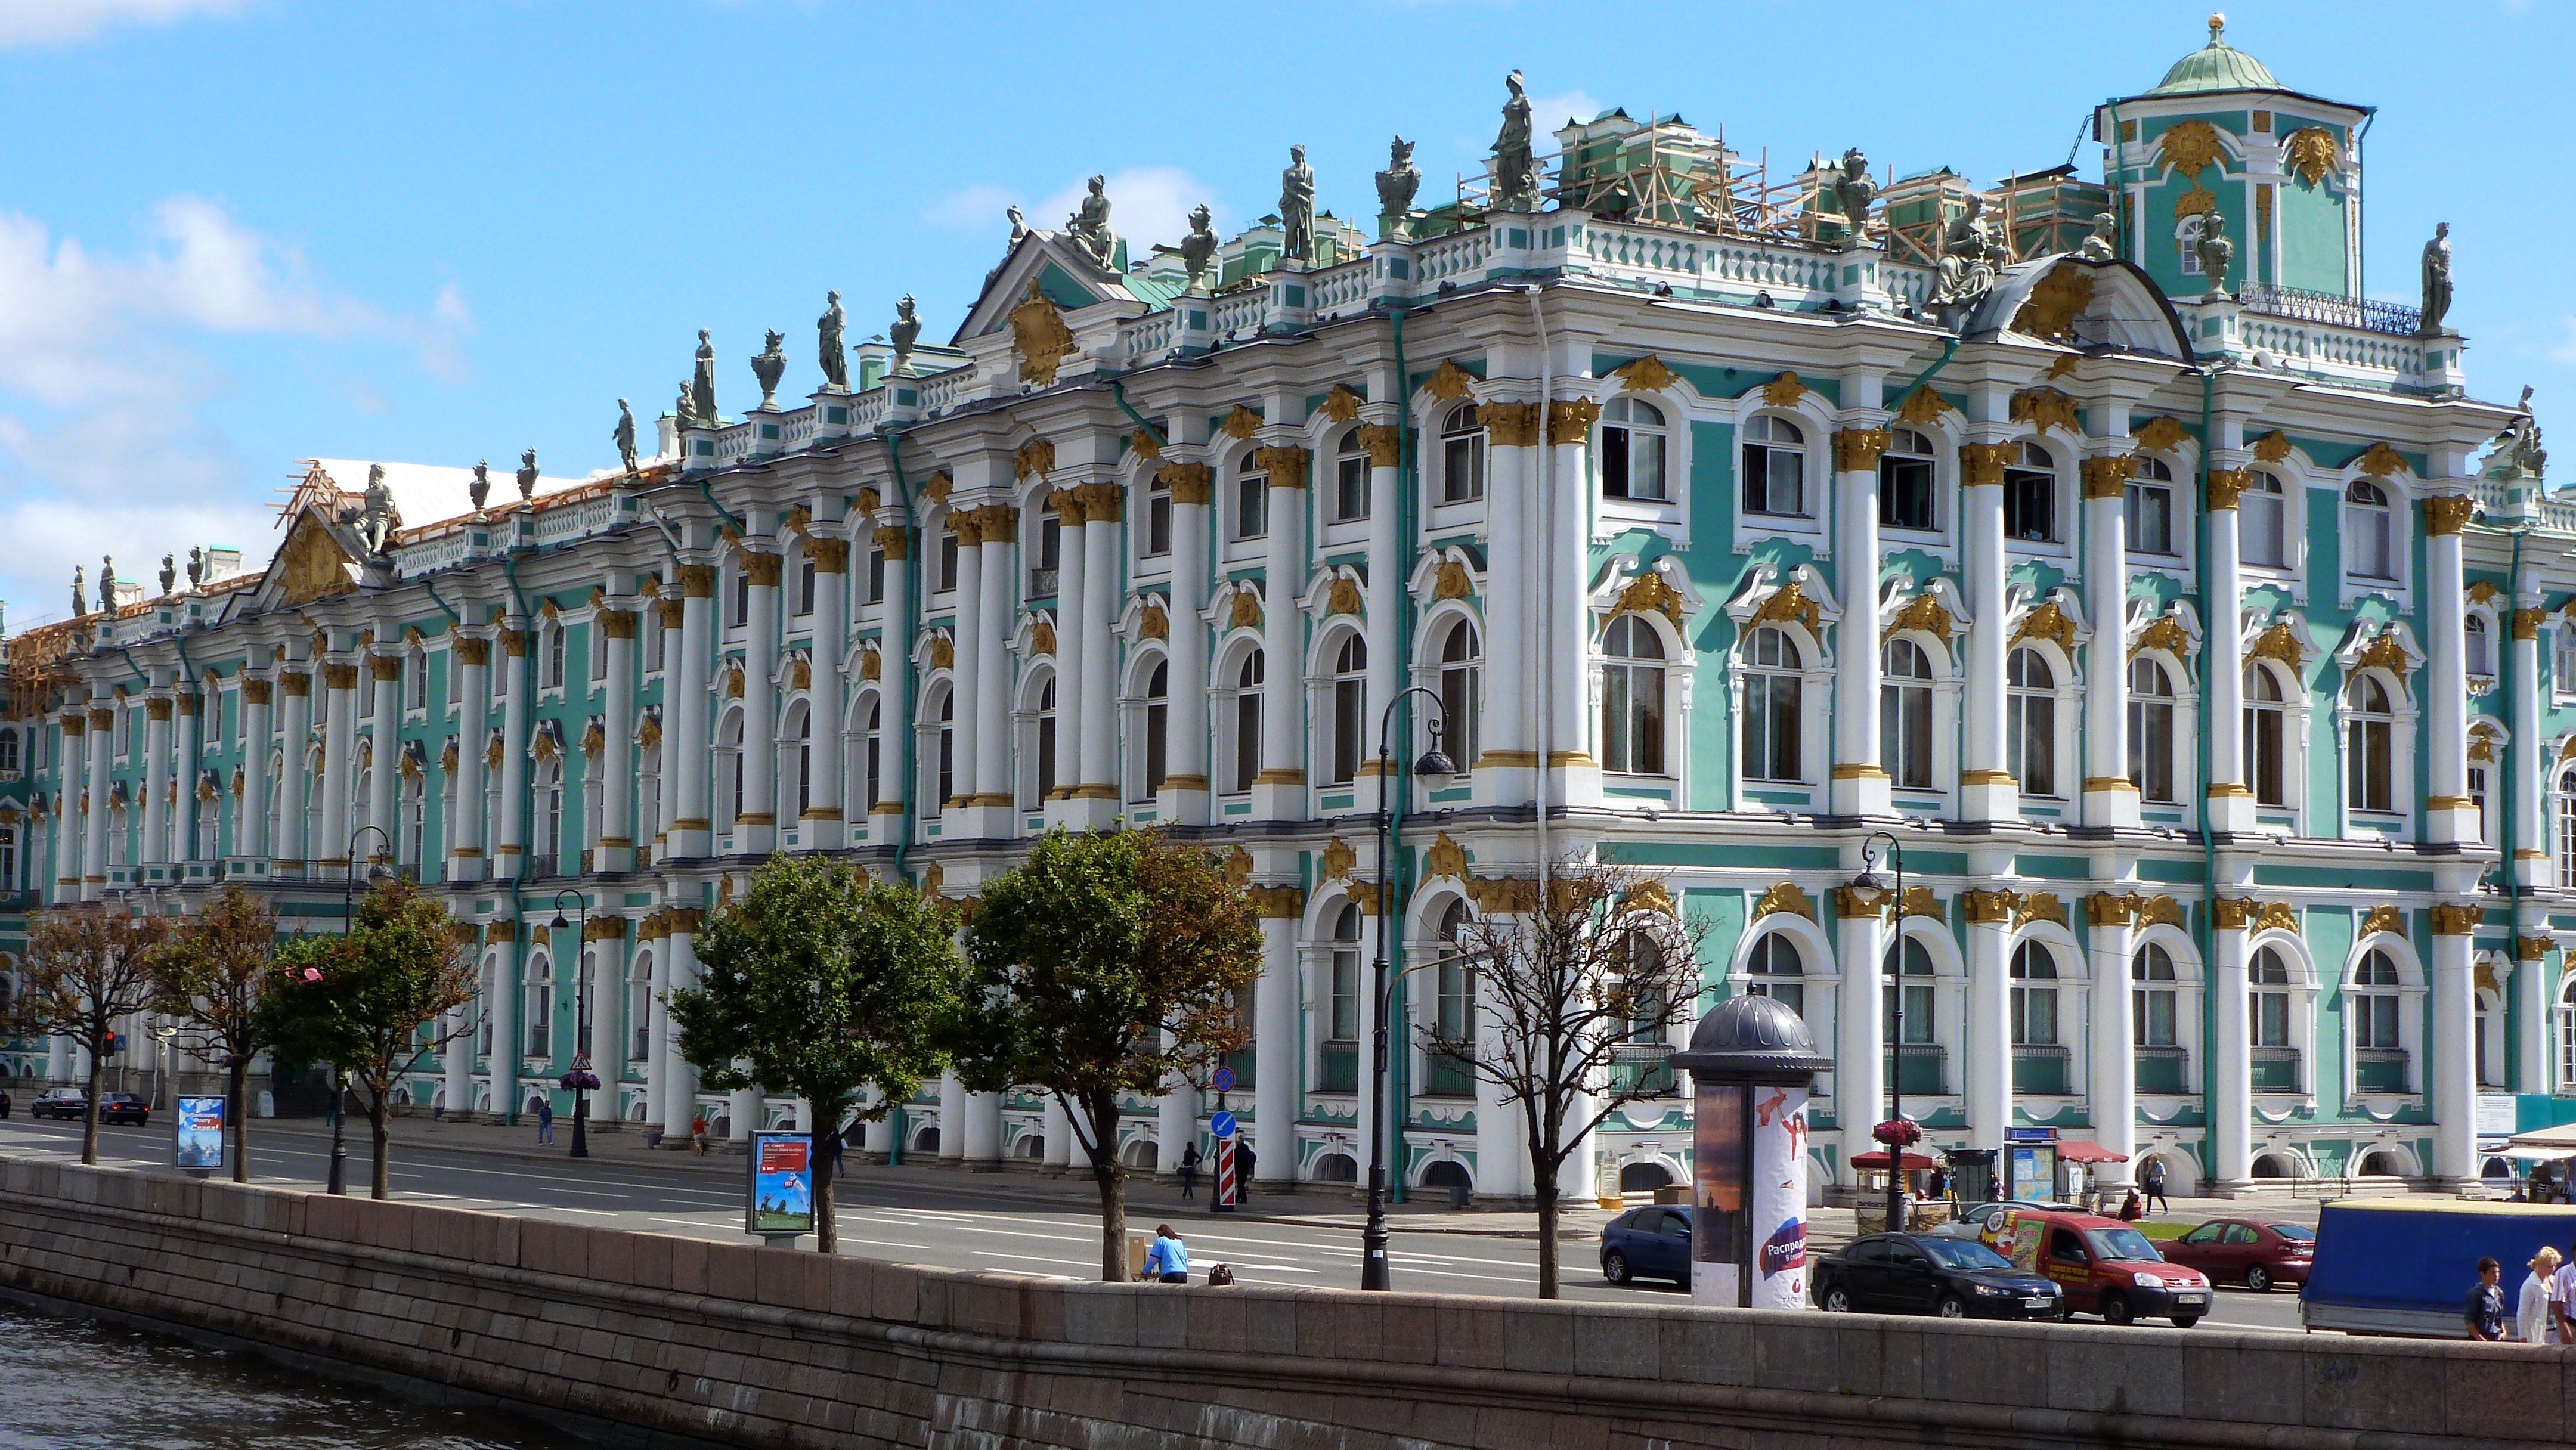 Hermitage 4K wallpaper for your desktop or mobile screen free and easy to download